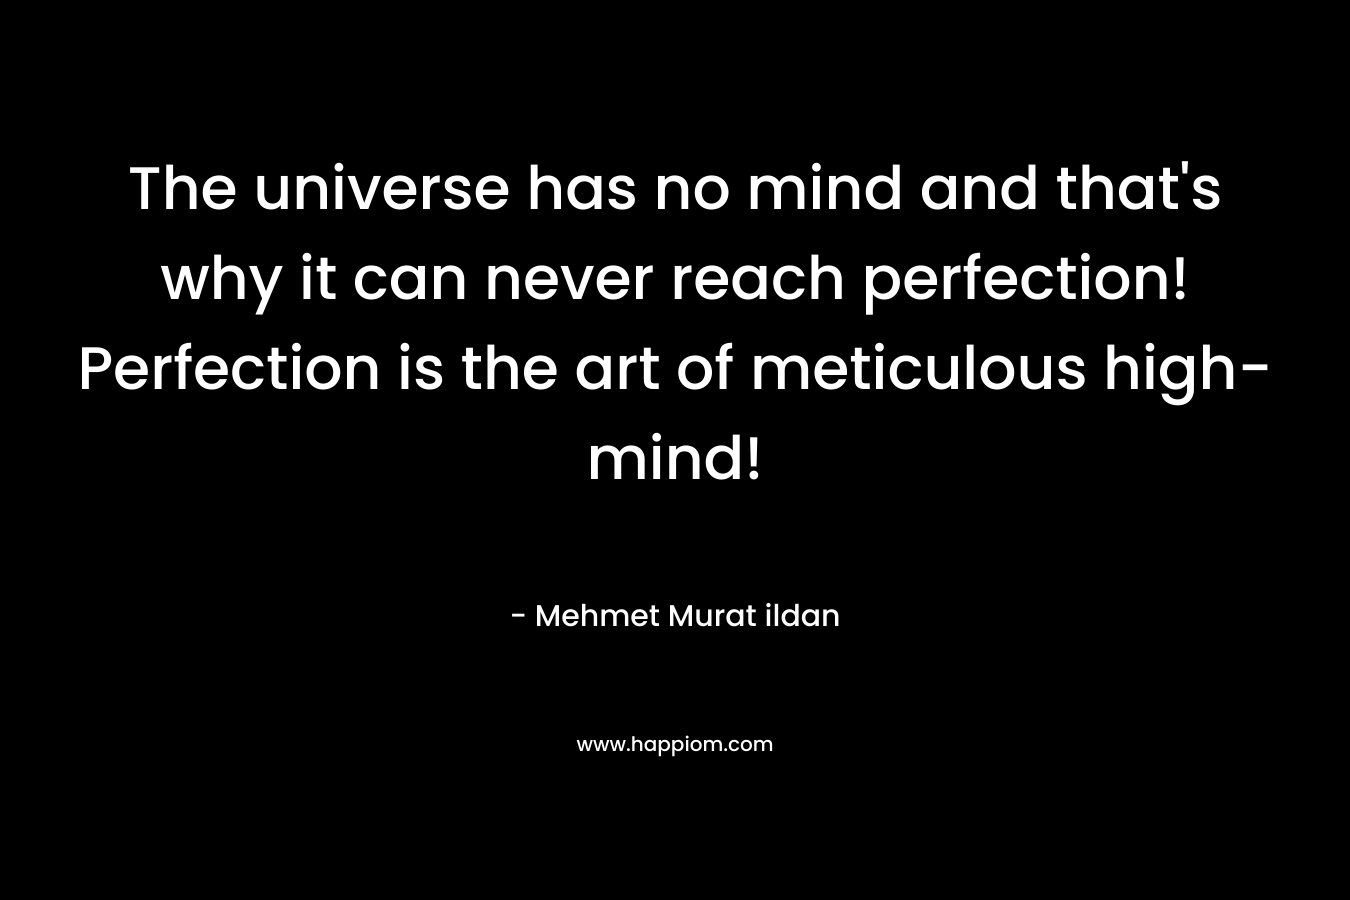 The universe has no mind and that’s why it can never reach perfection! Perfection is the art of meticulous high-mind! – Mehmet Murat ildan